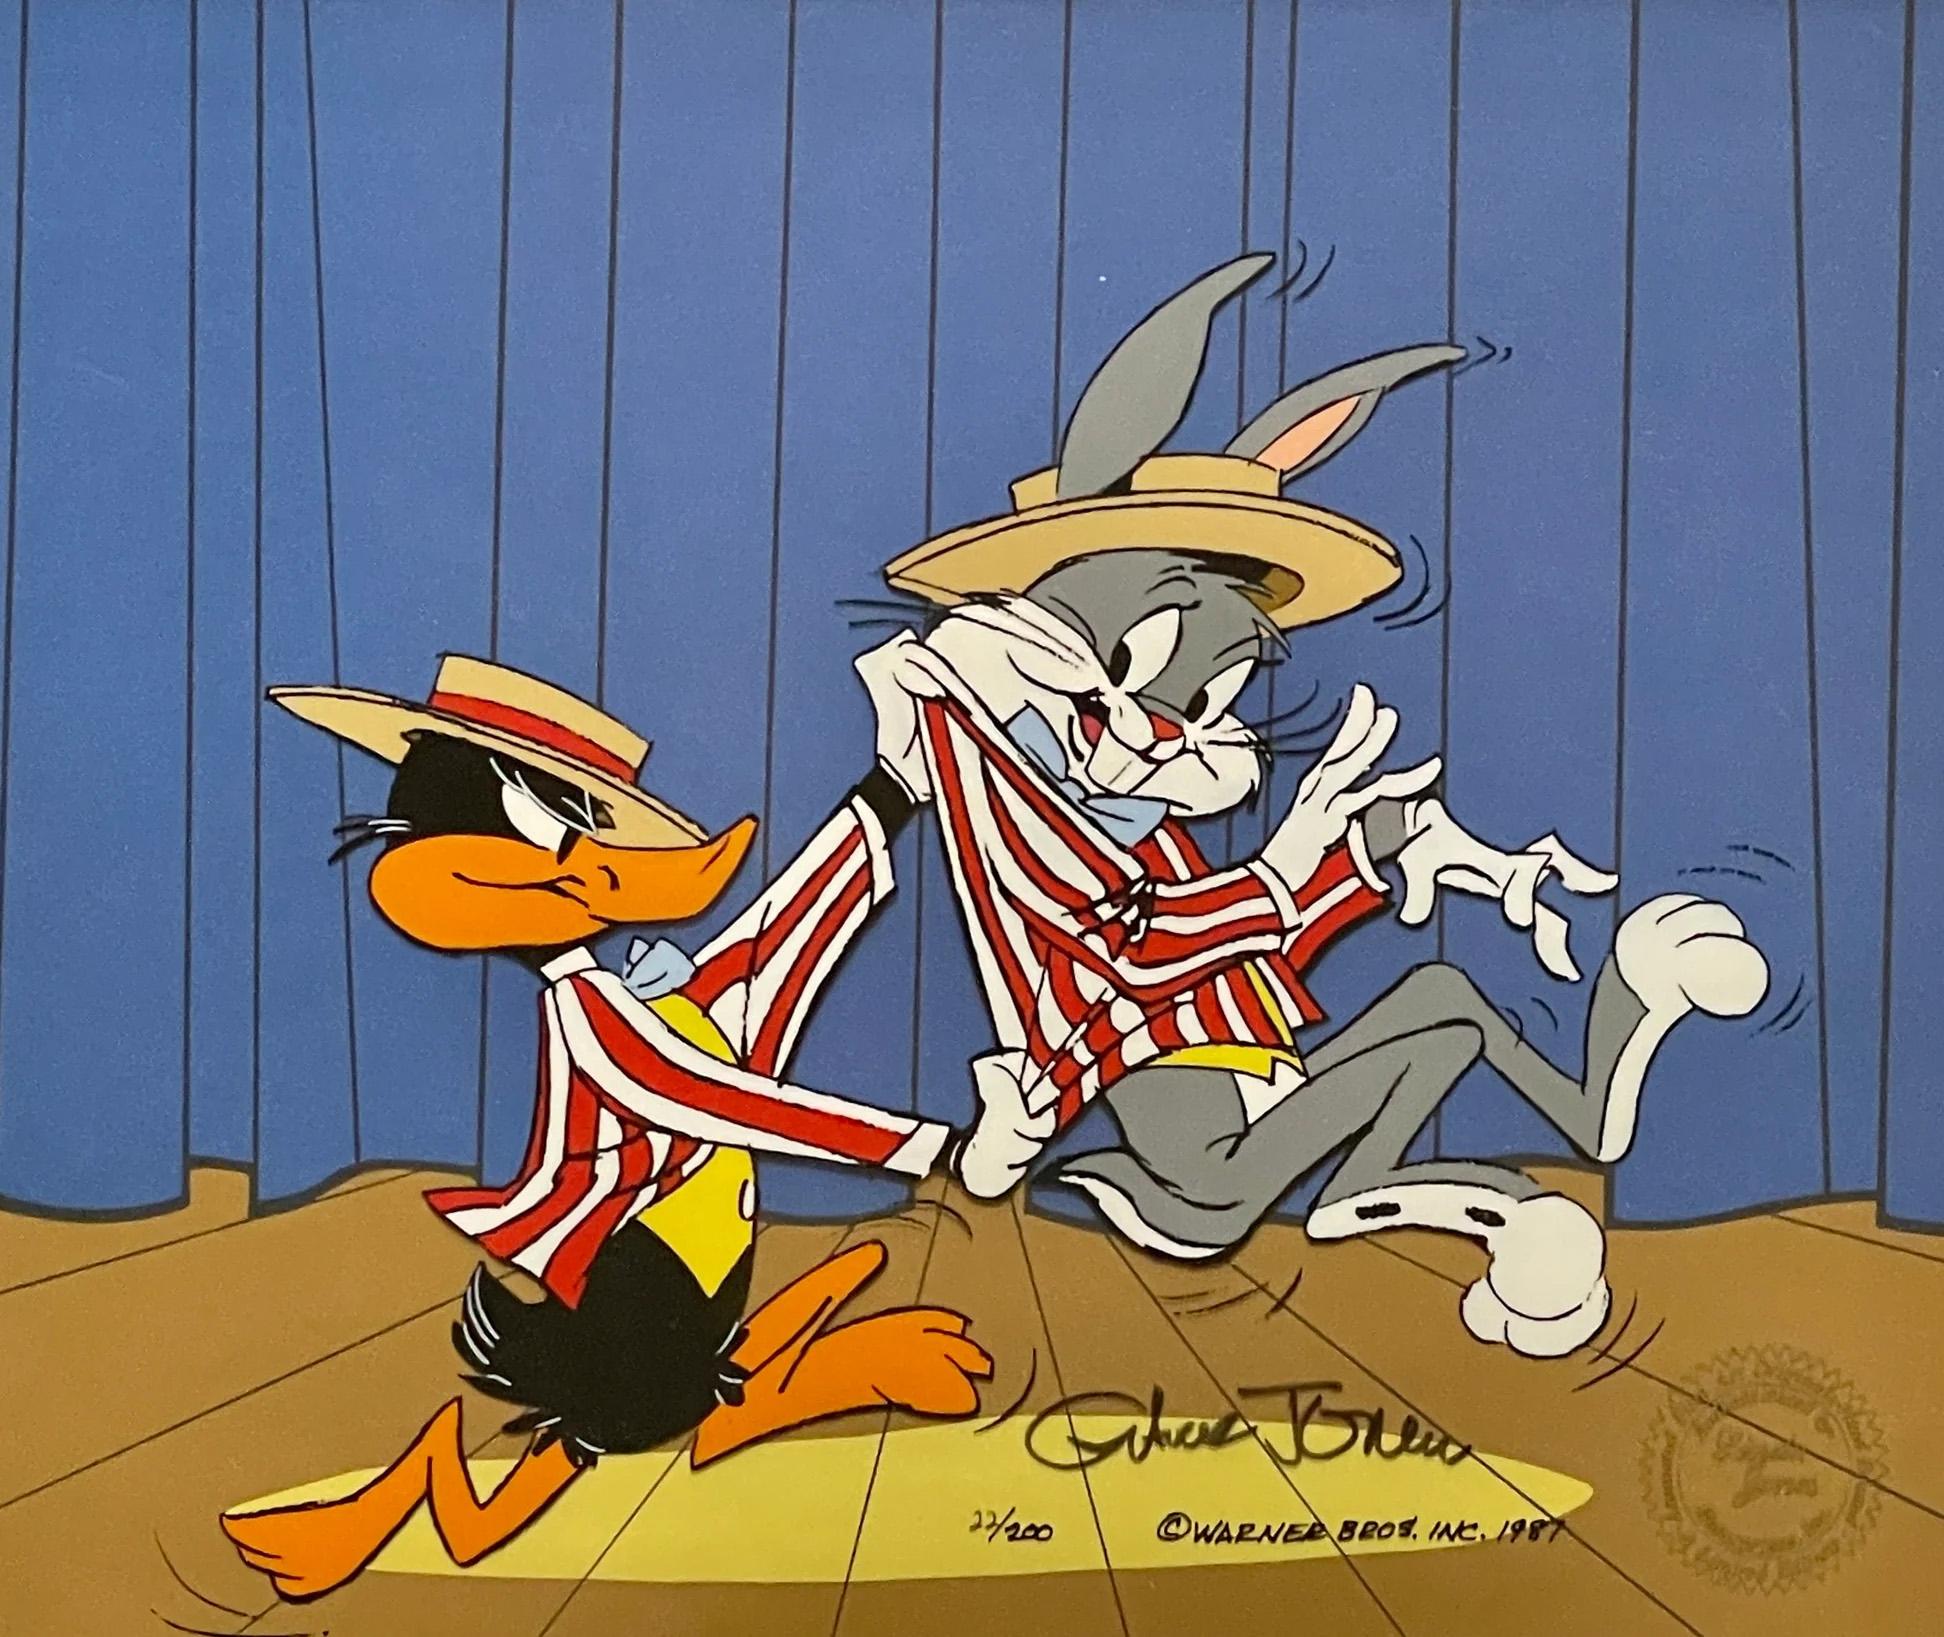 MEDIUM: Limited Edition Cel
IMAGE SIZE: 12 Field
EDITION SIZE: 200
SKU: CCV2729

Framing included in price.

ABOUT THE IMAGE: This cel is hand-signed by Chuck Jones and is numbered 22/200.